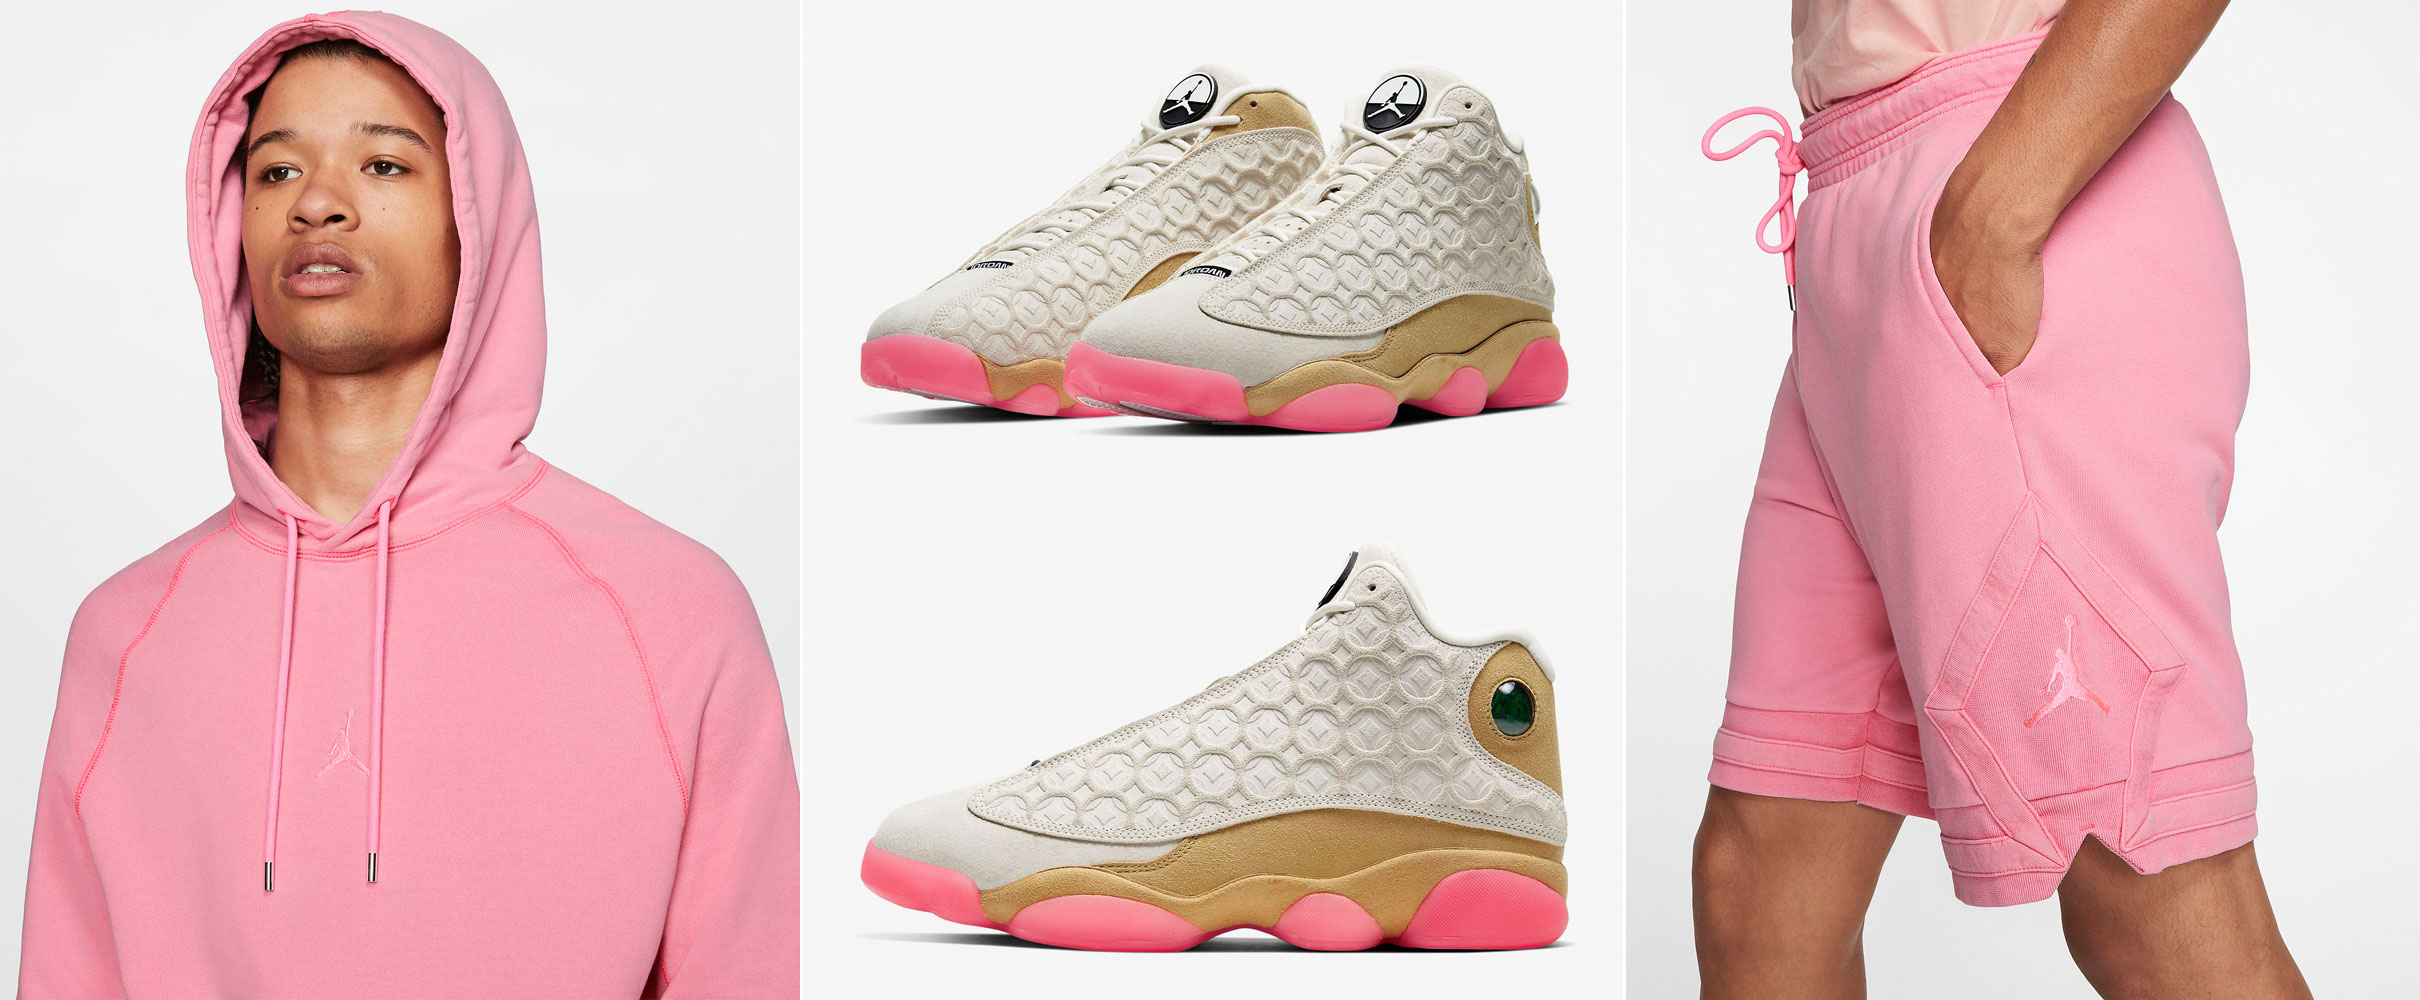 jordan 13 chinese new year outfits